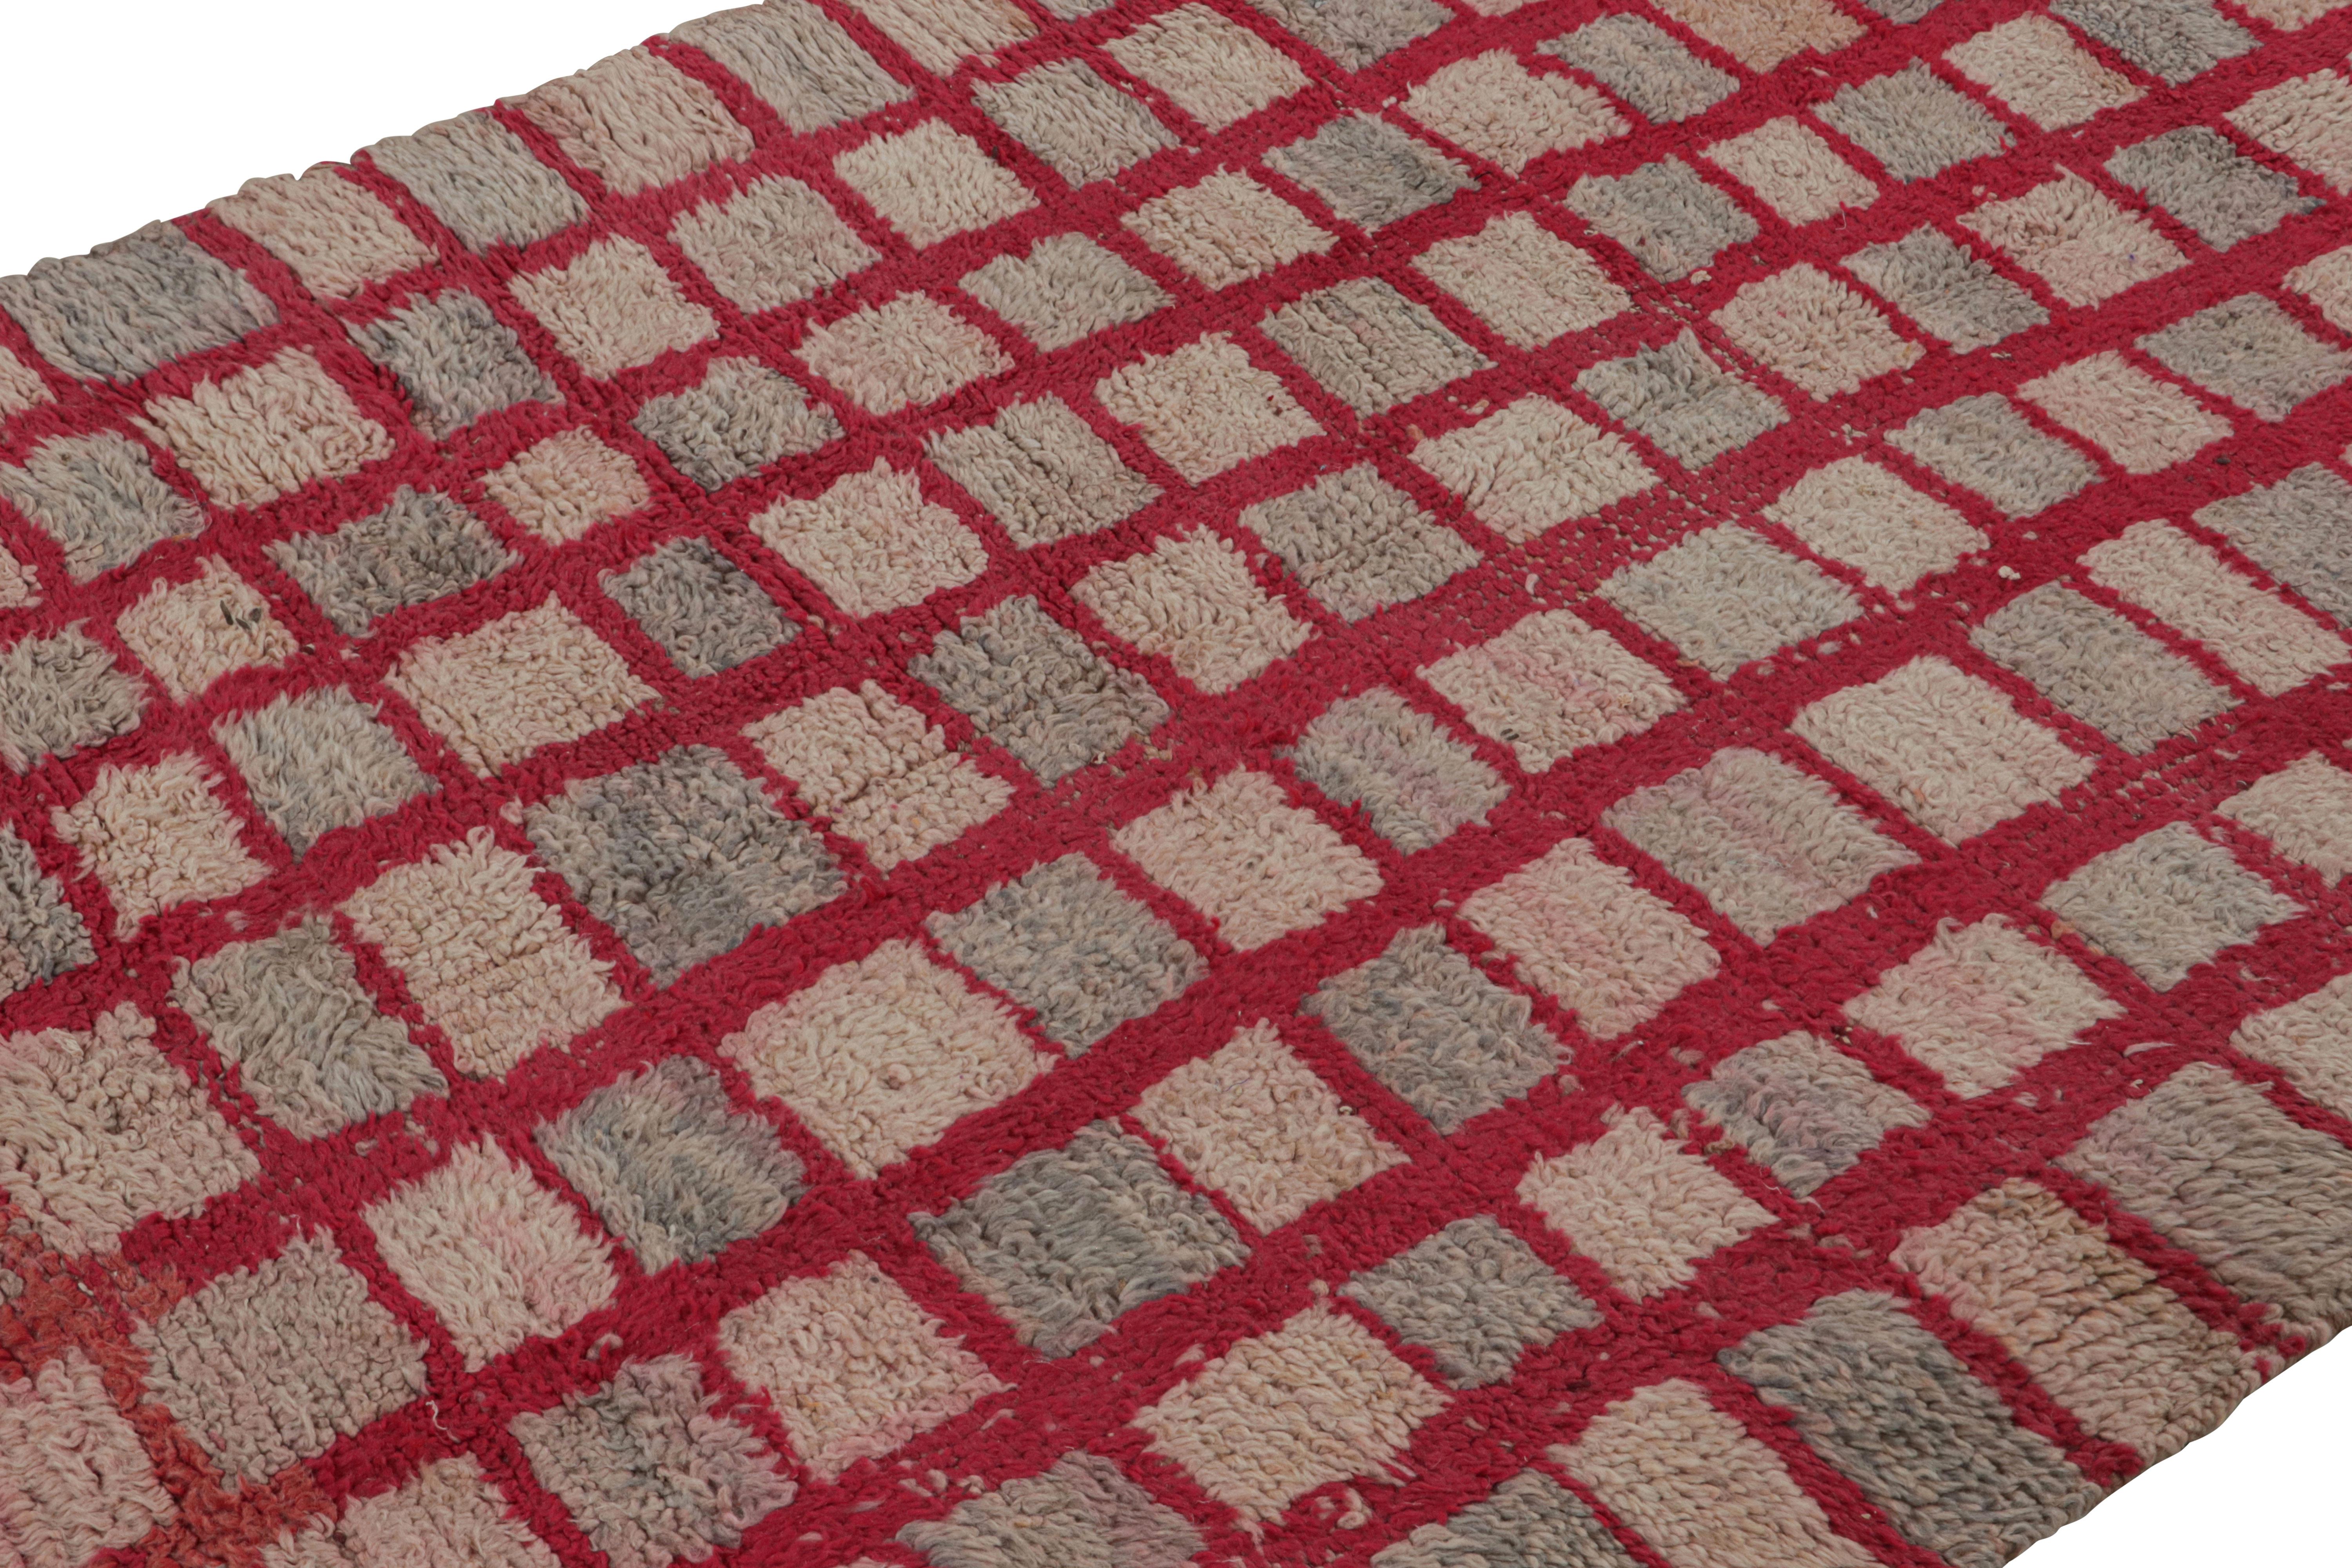 Wool Vintage Moroccan Rug in Pink and Red Geometric Patterns, from Rug & Kilim For Sale